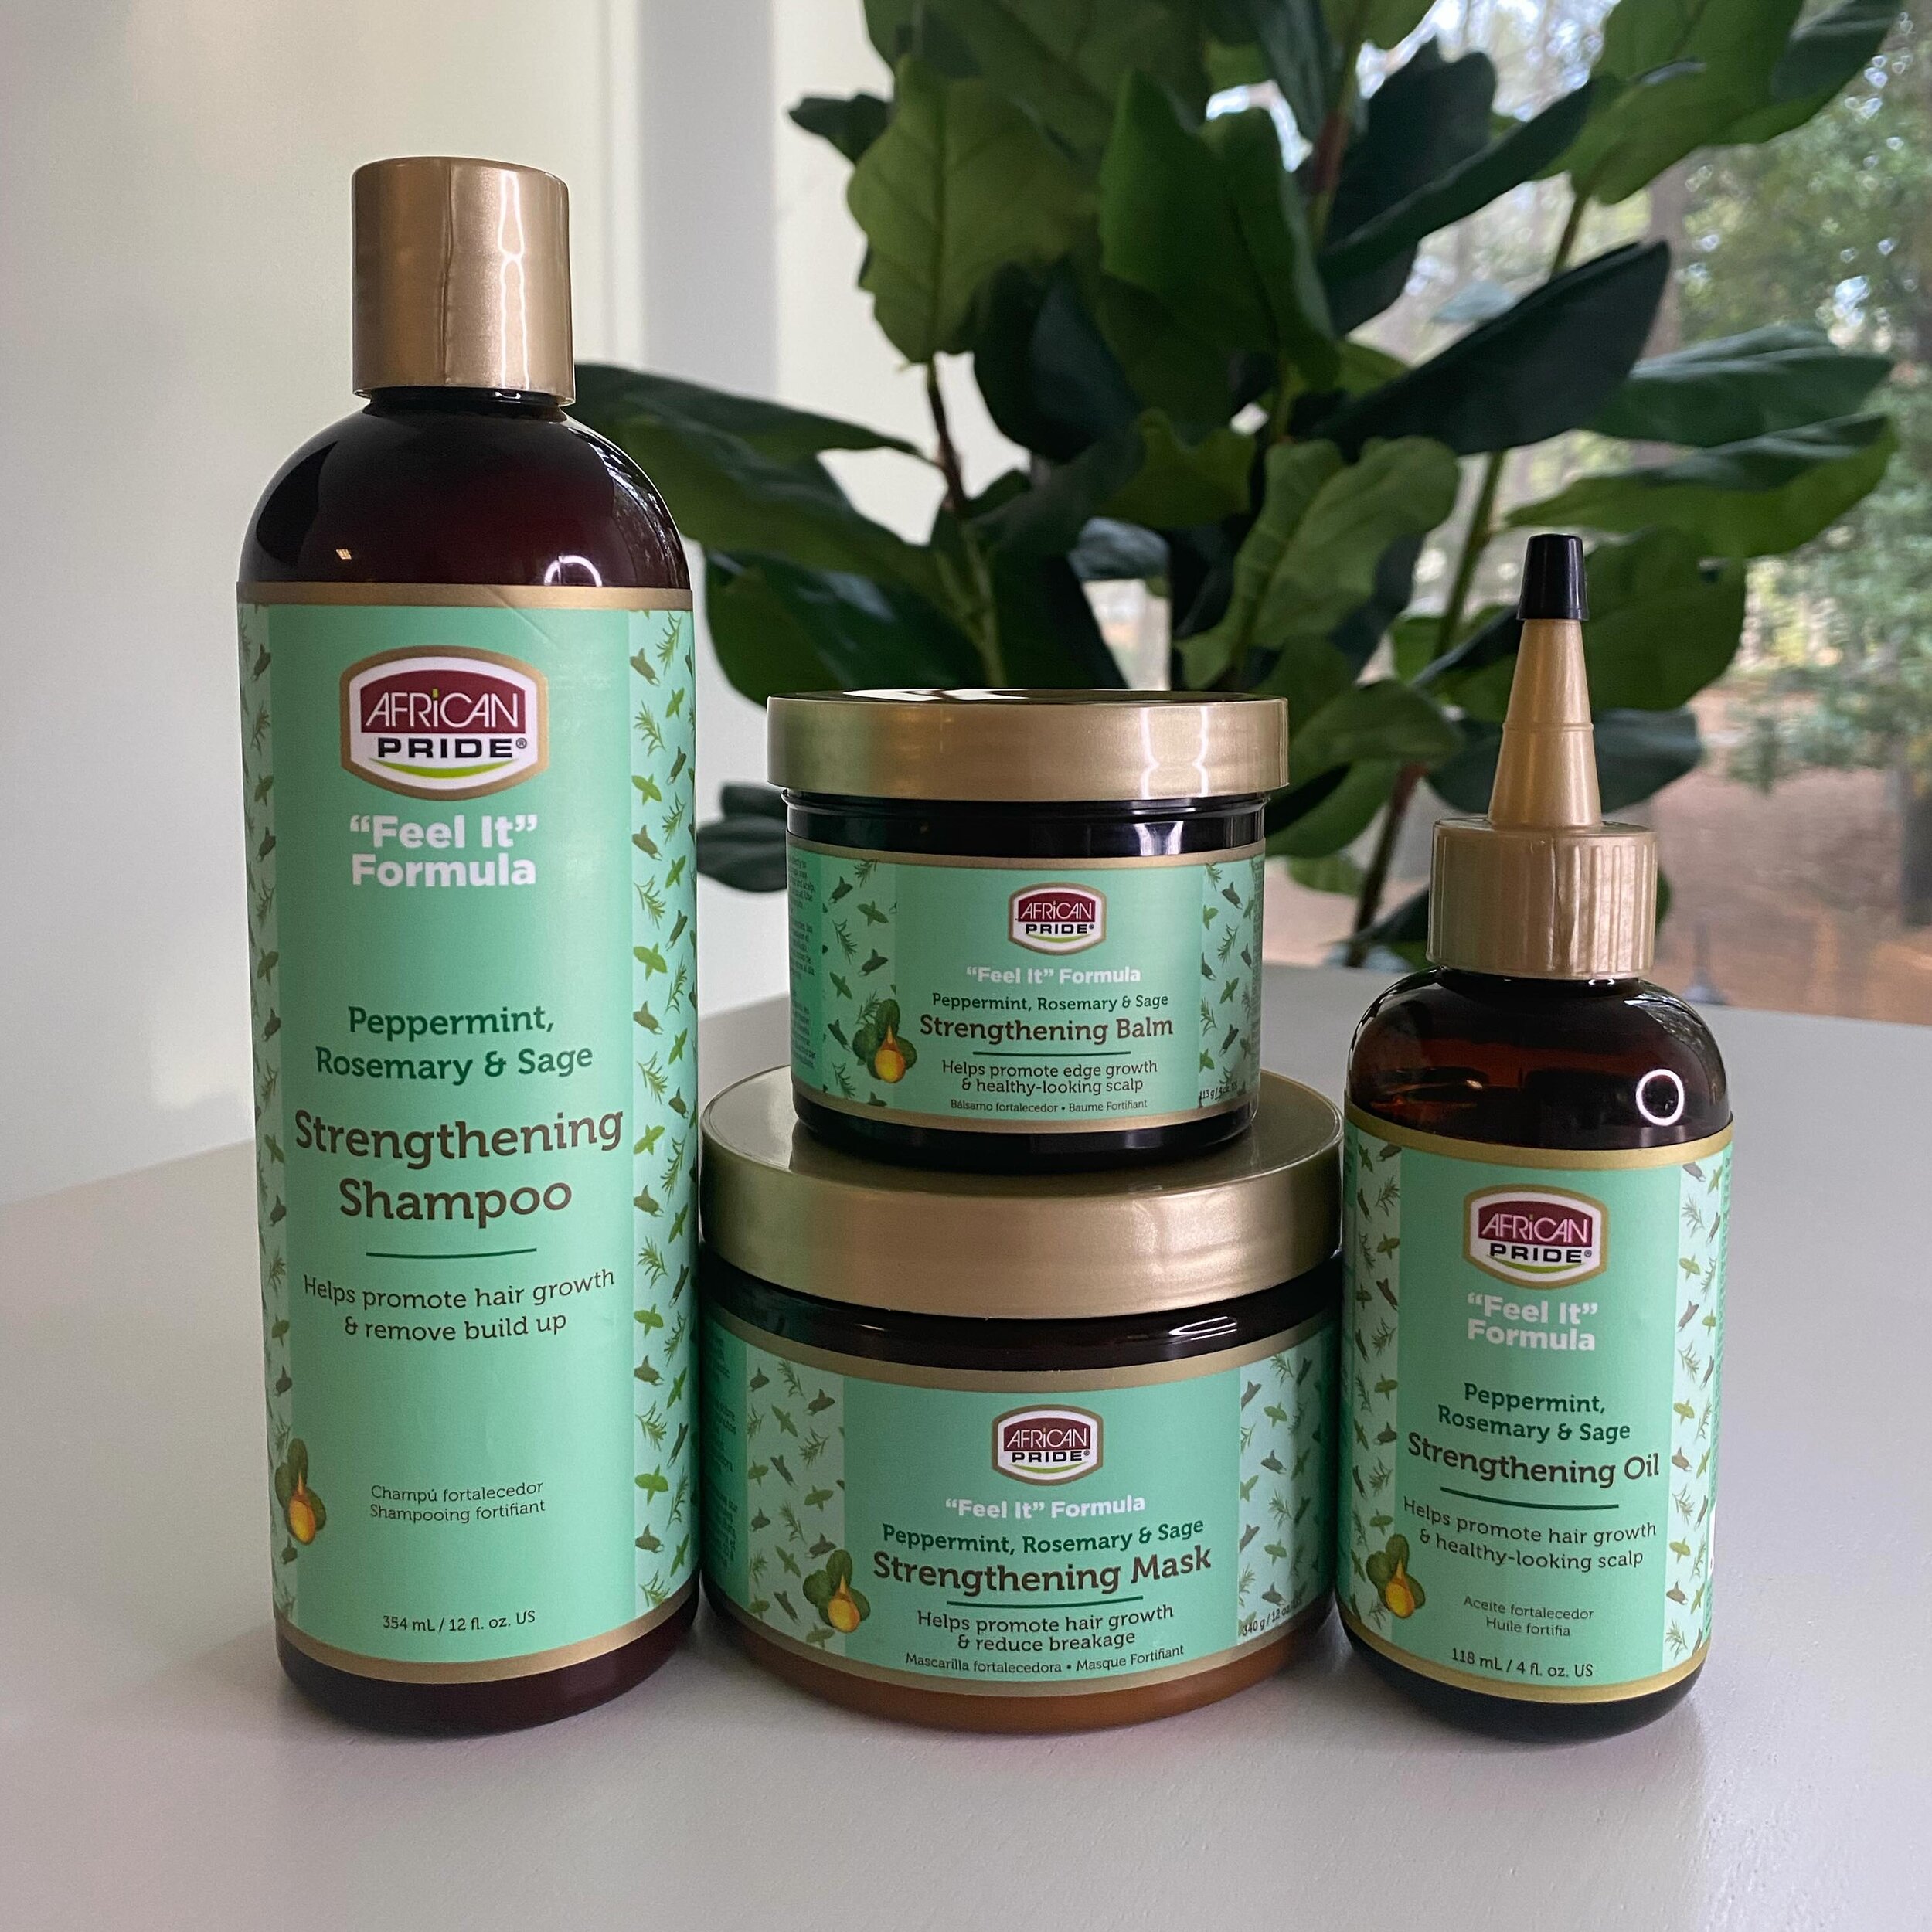 African Pride&rsquo;s new &ldquo;Feel It&rdquo; Formula collection now available at Target and Walgreens! Look for the minty green labels! #productdesign #packagingdesign #graphicdesign #haircare #tiffanycharesse